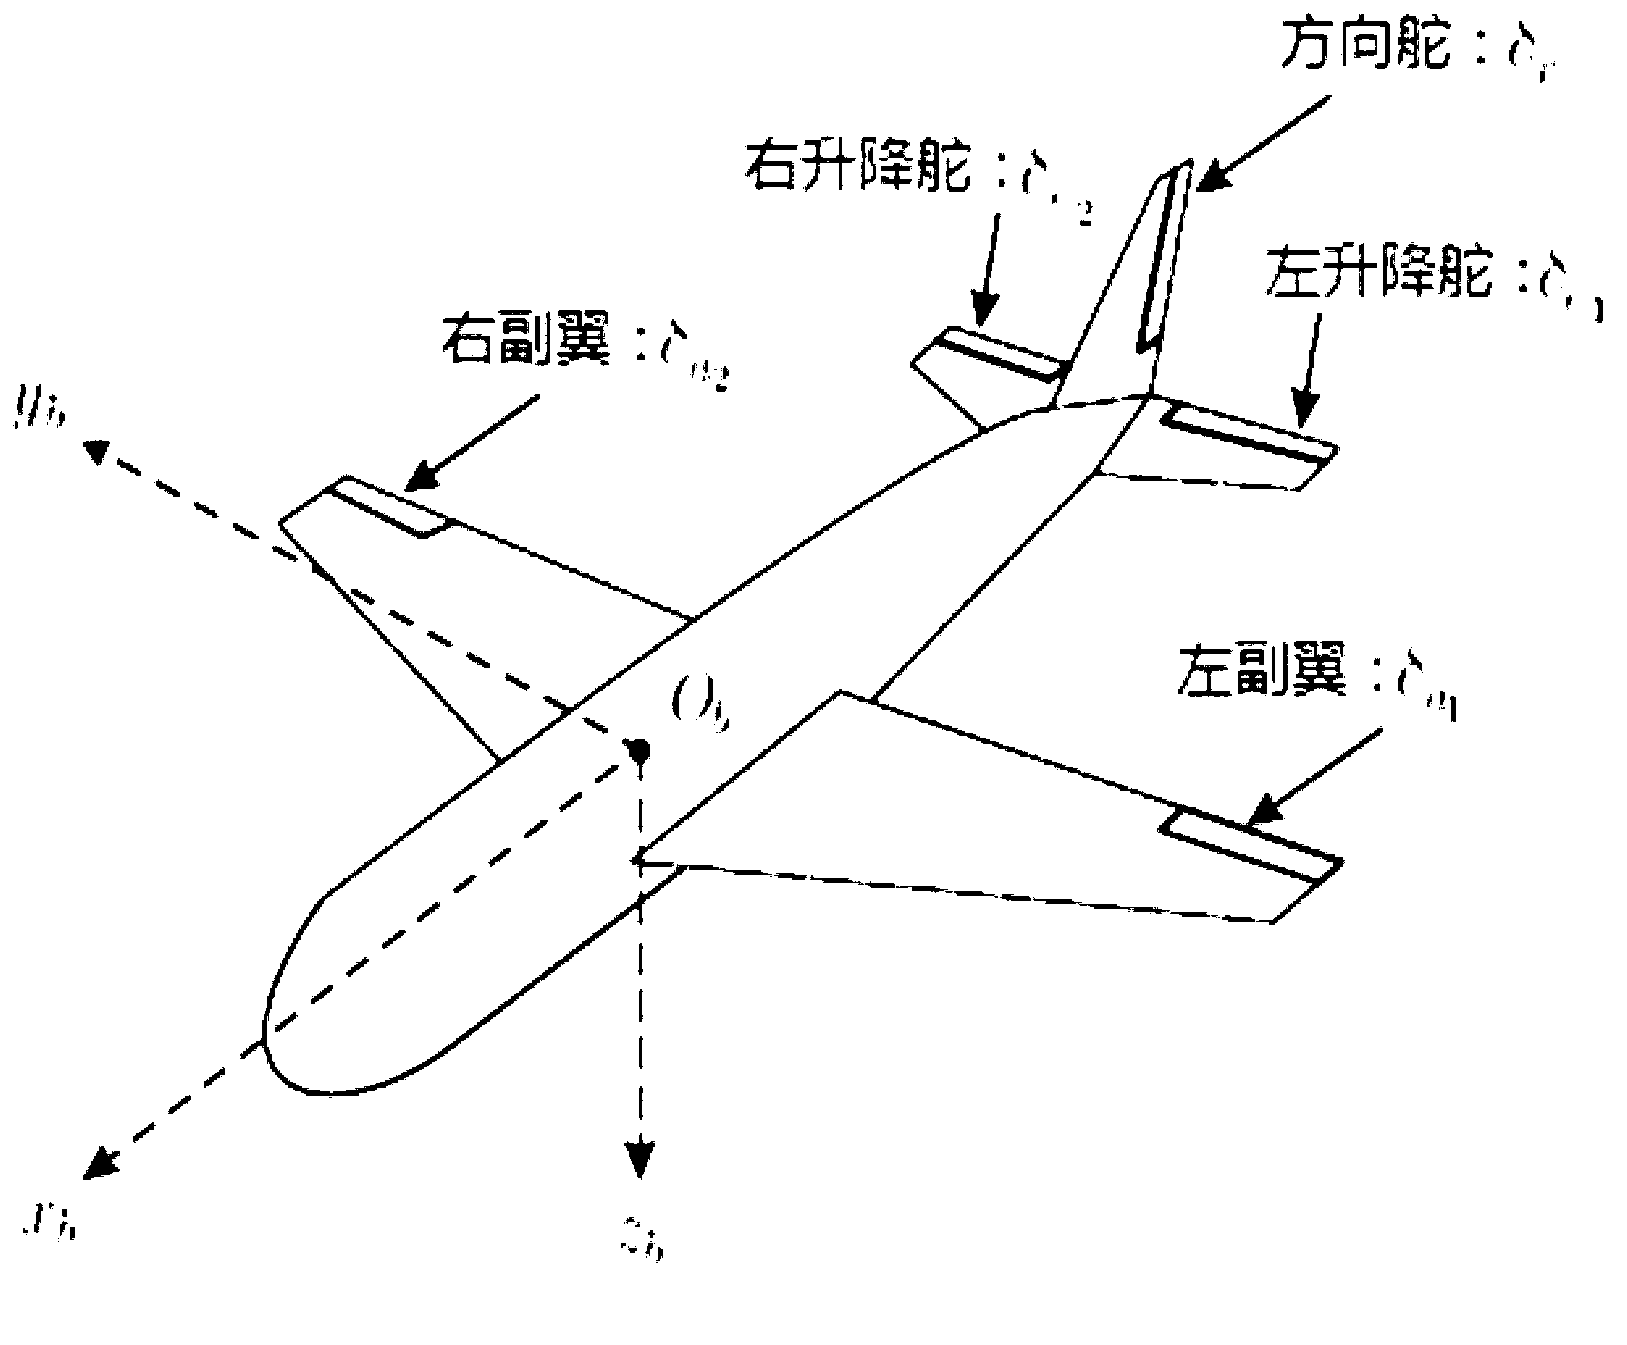 Fault tolerance flight control system and method based on control surface faults